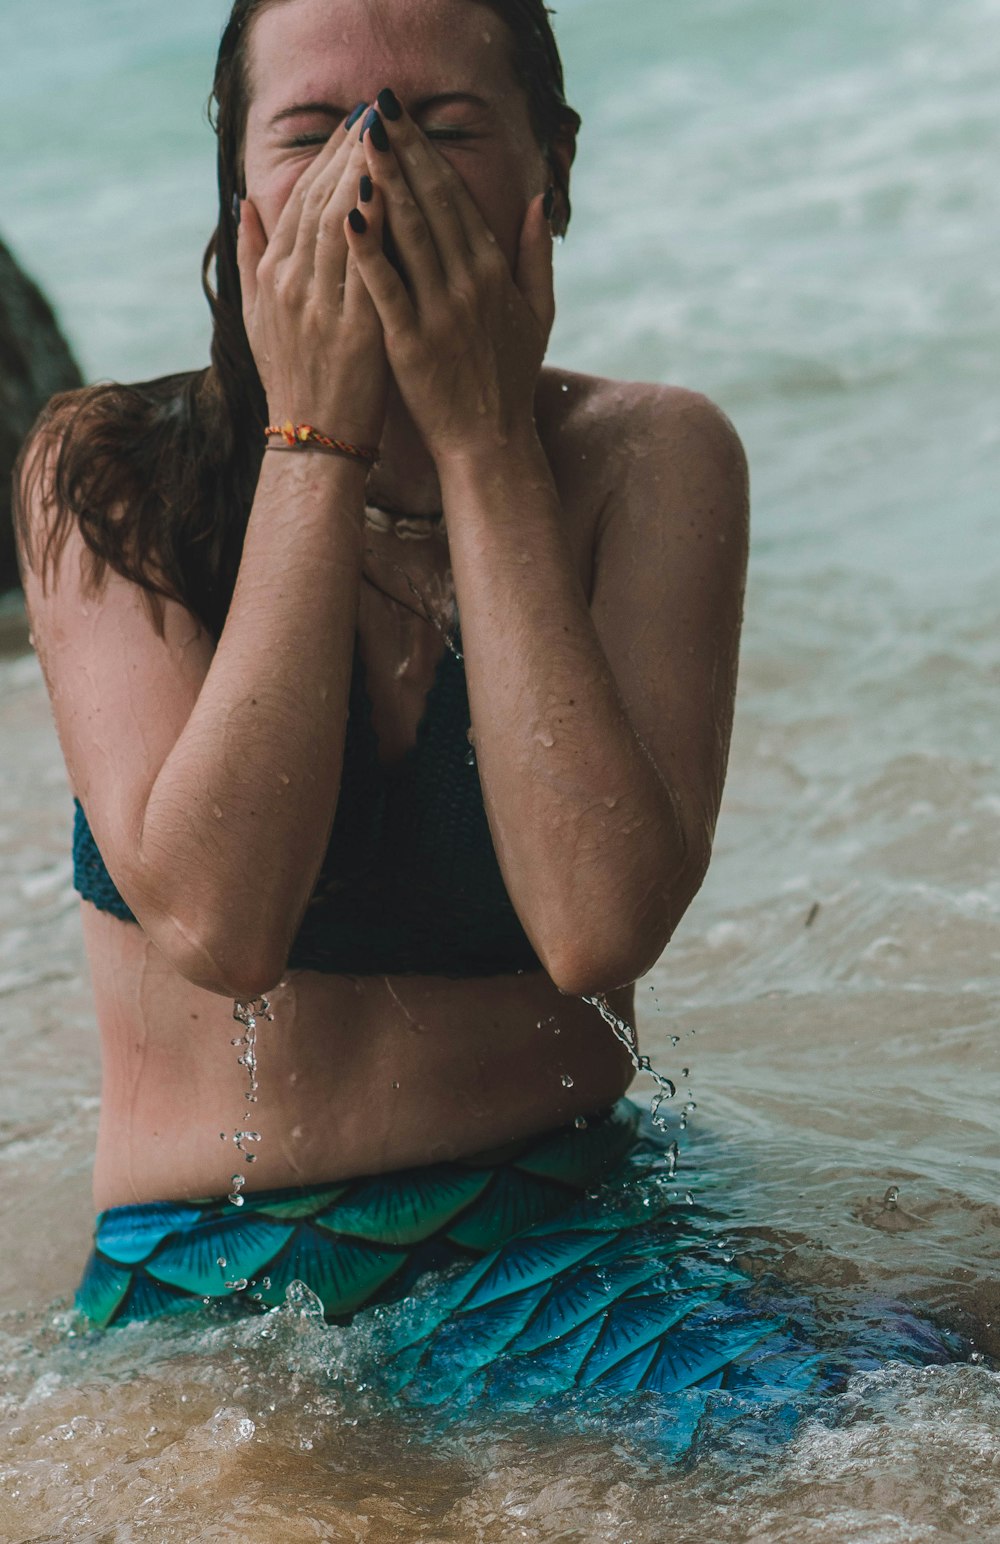 a woman sitting in the water covering her face